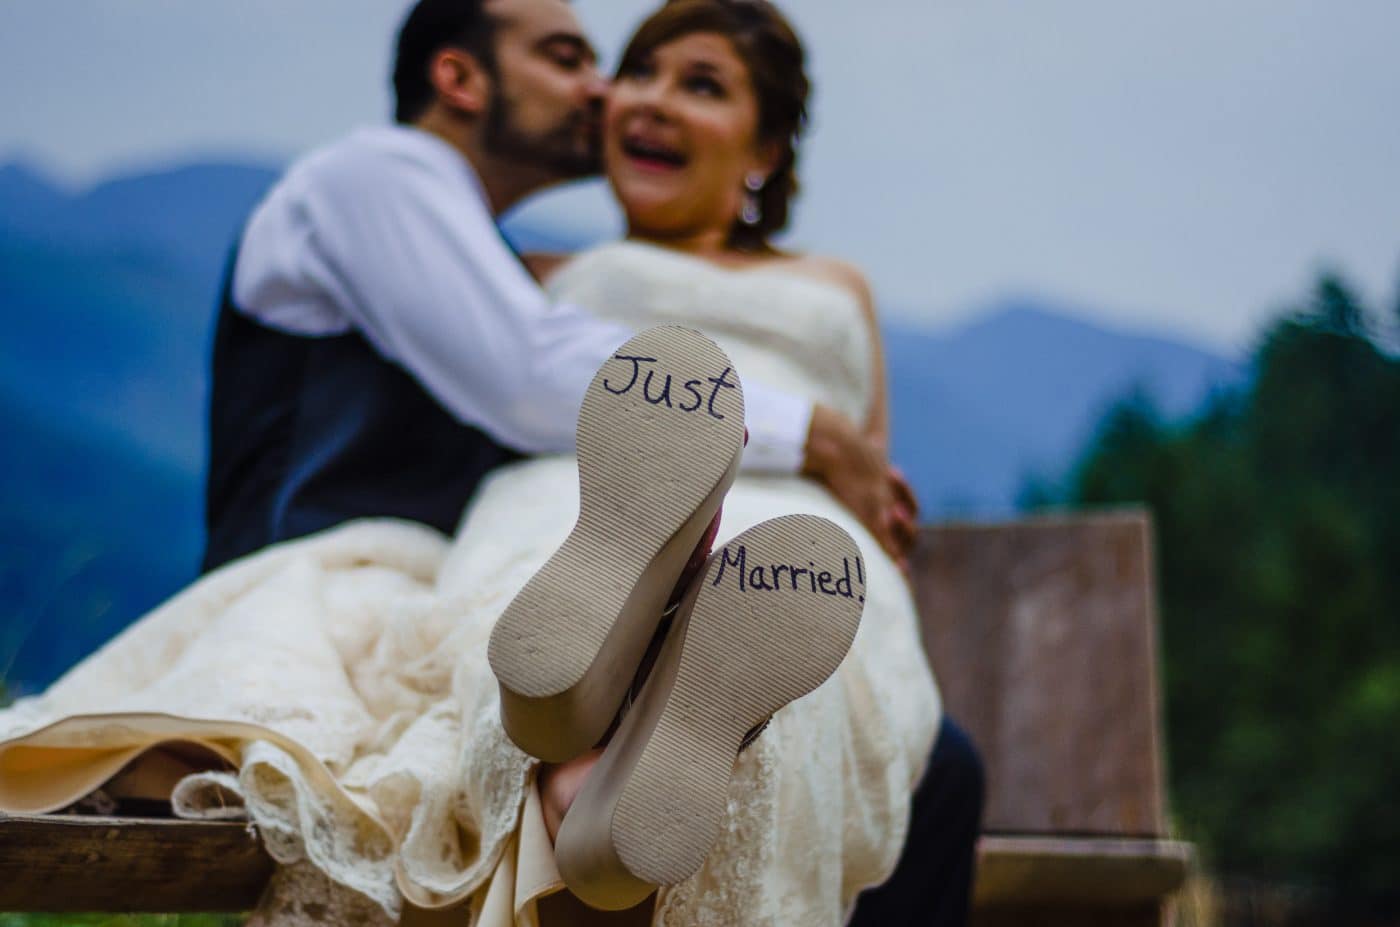 Groom kisses bride with just married notes on bride's shoes